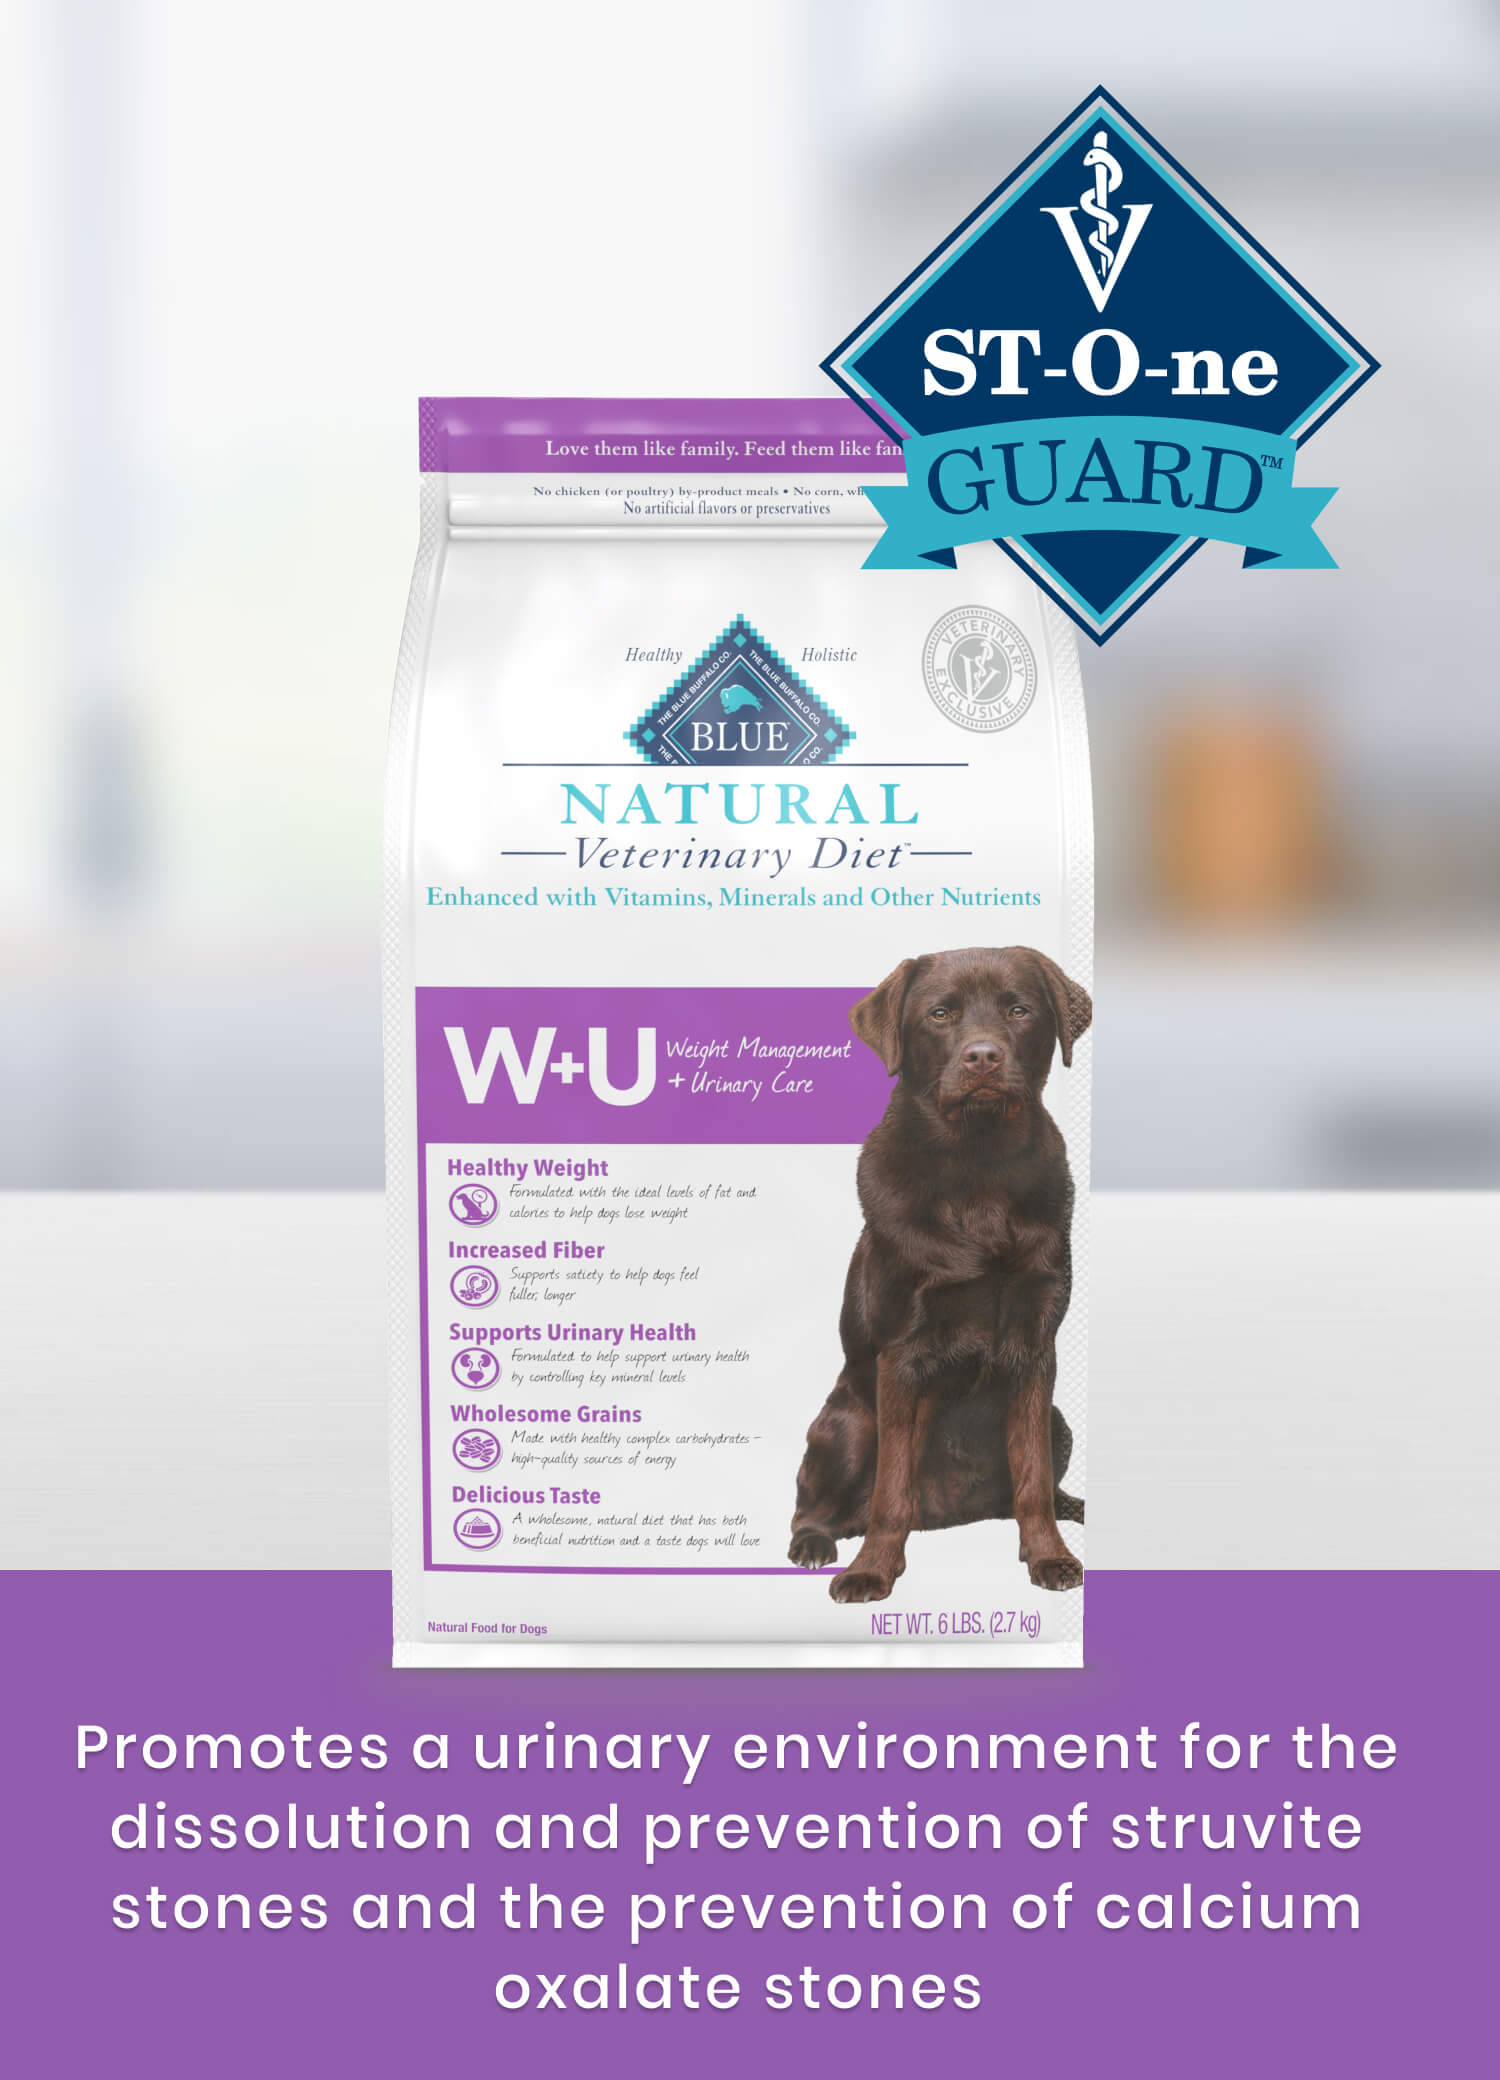 Guide to Choosing the Best Weight Management Dog Food